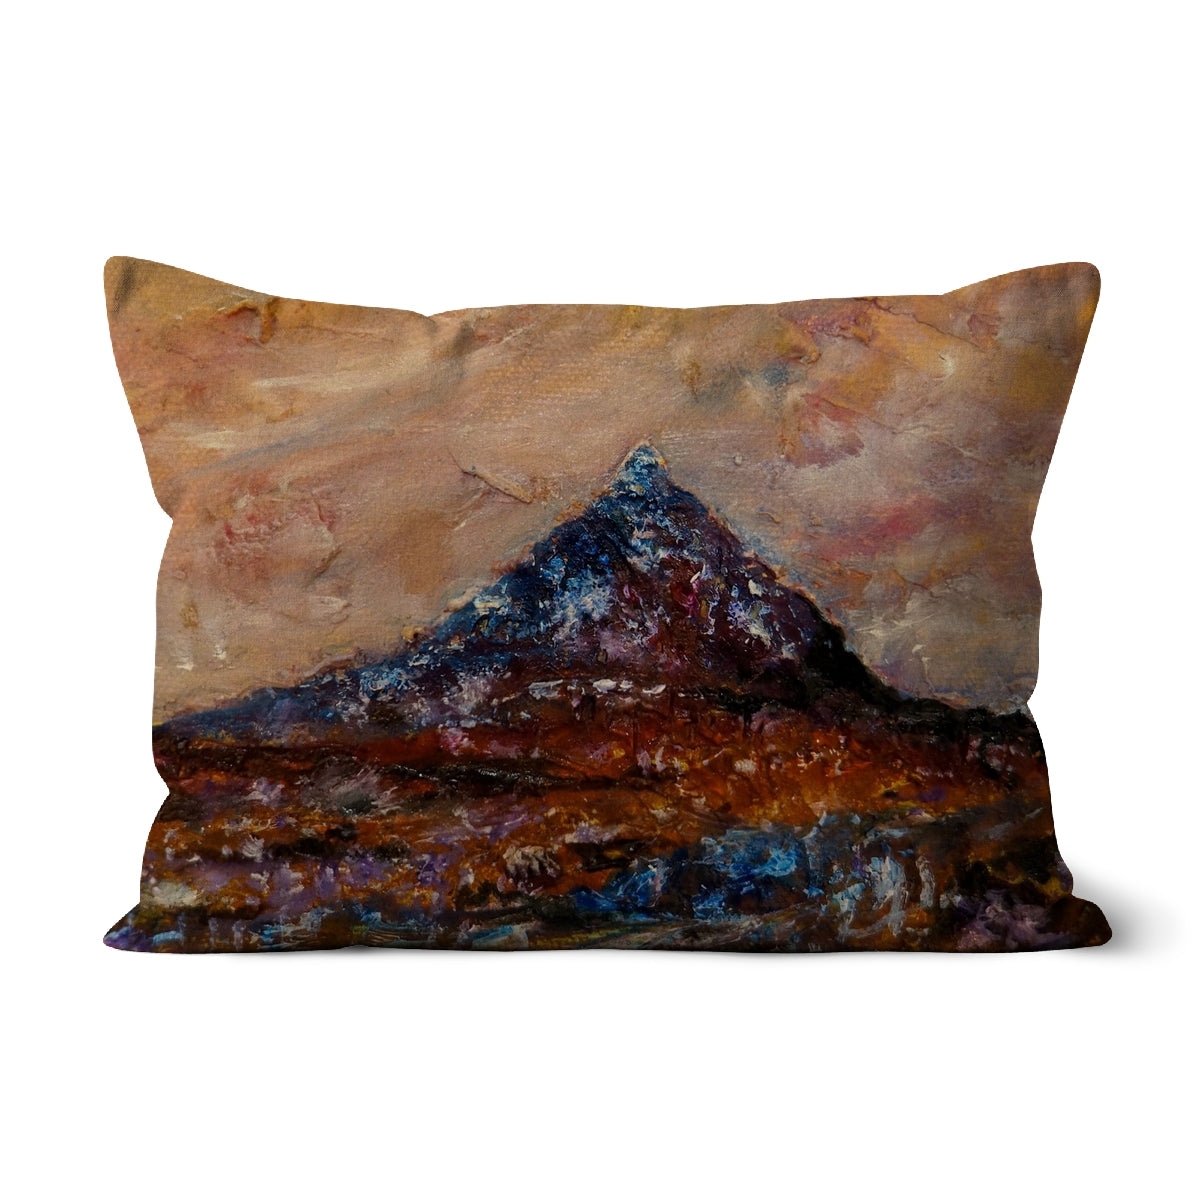 Buachaille Etive Mòr Art Gifts Cushion-Cushions-Glencoe Art Gallery-Canvas-19"x13"-Paintings, Prints, Homeware, Art Gifts From Scotland By Scottish Artist Kevin Hunter